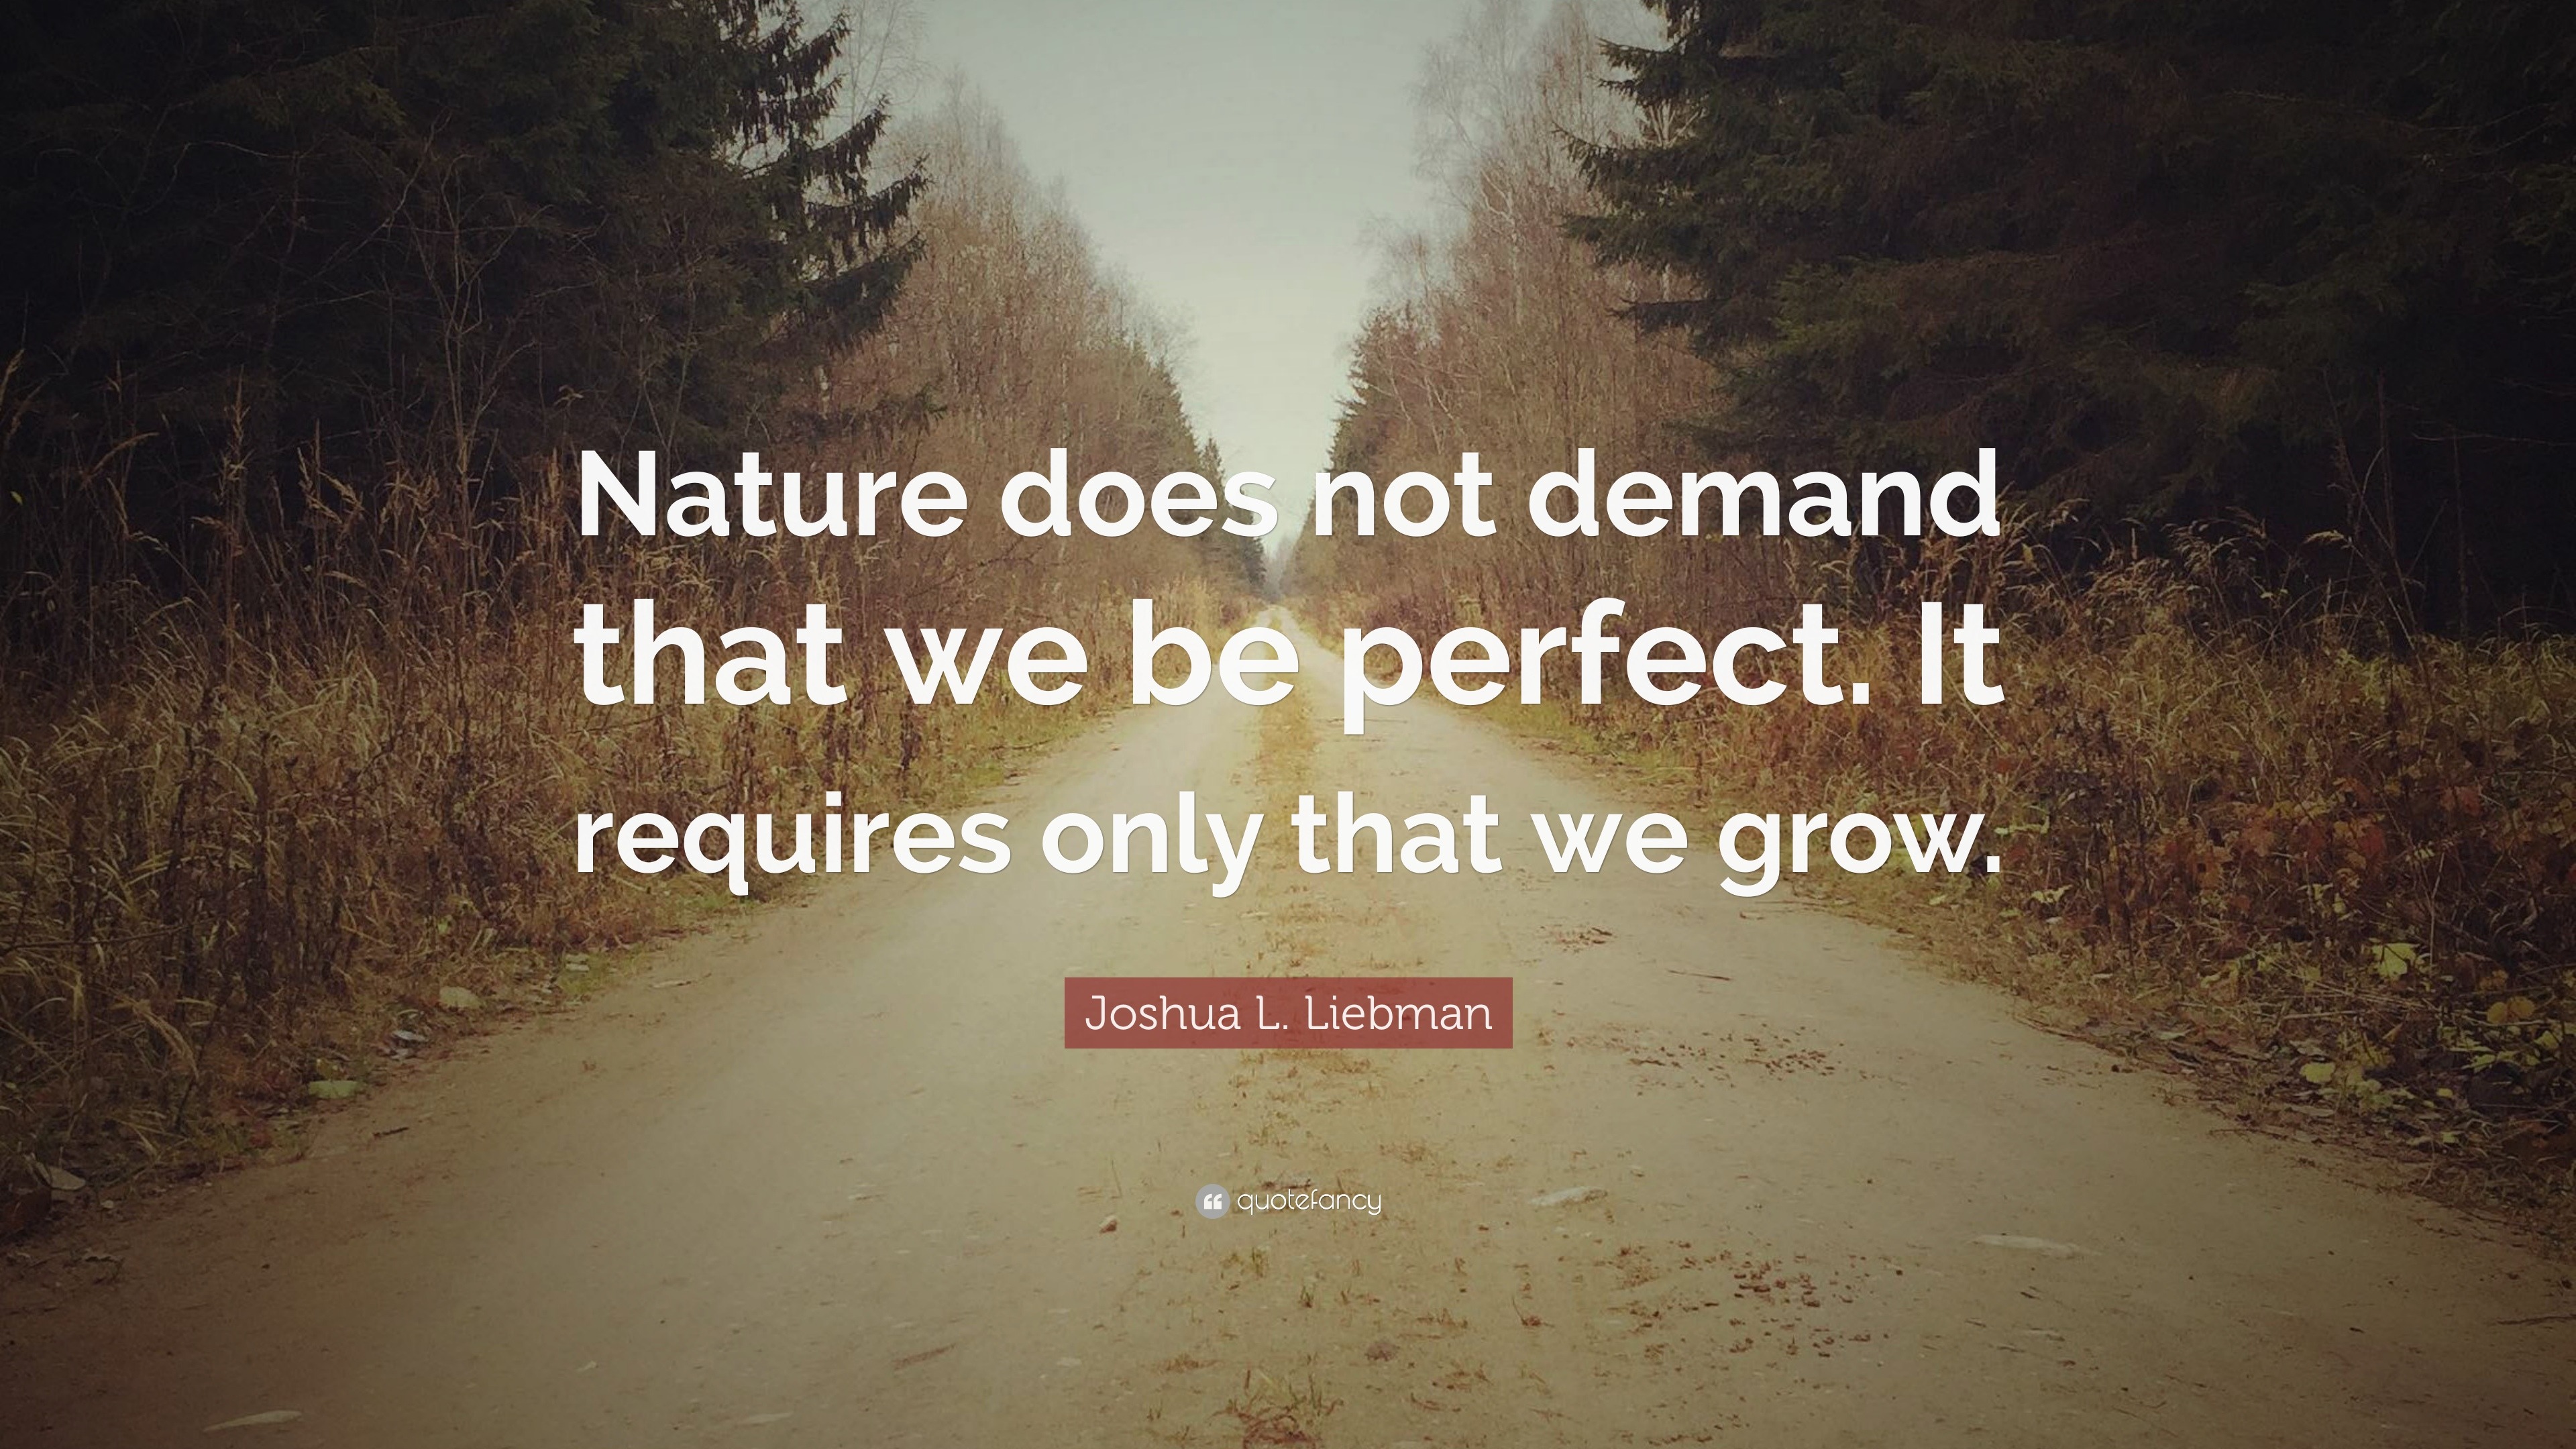 Joshua L. Liebman “Nature does not demand that we be perfect. requires that